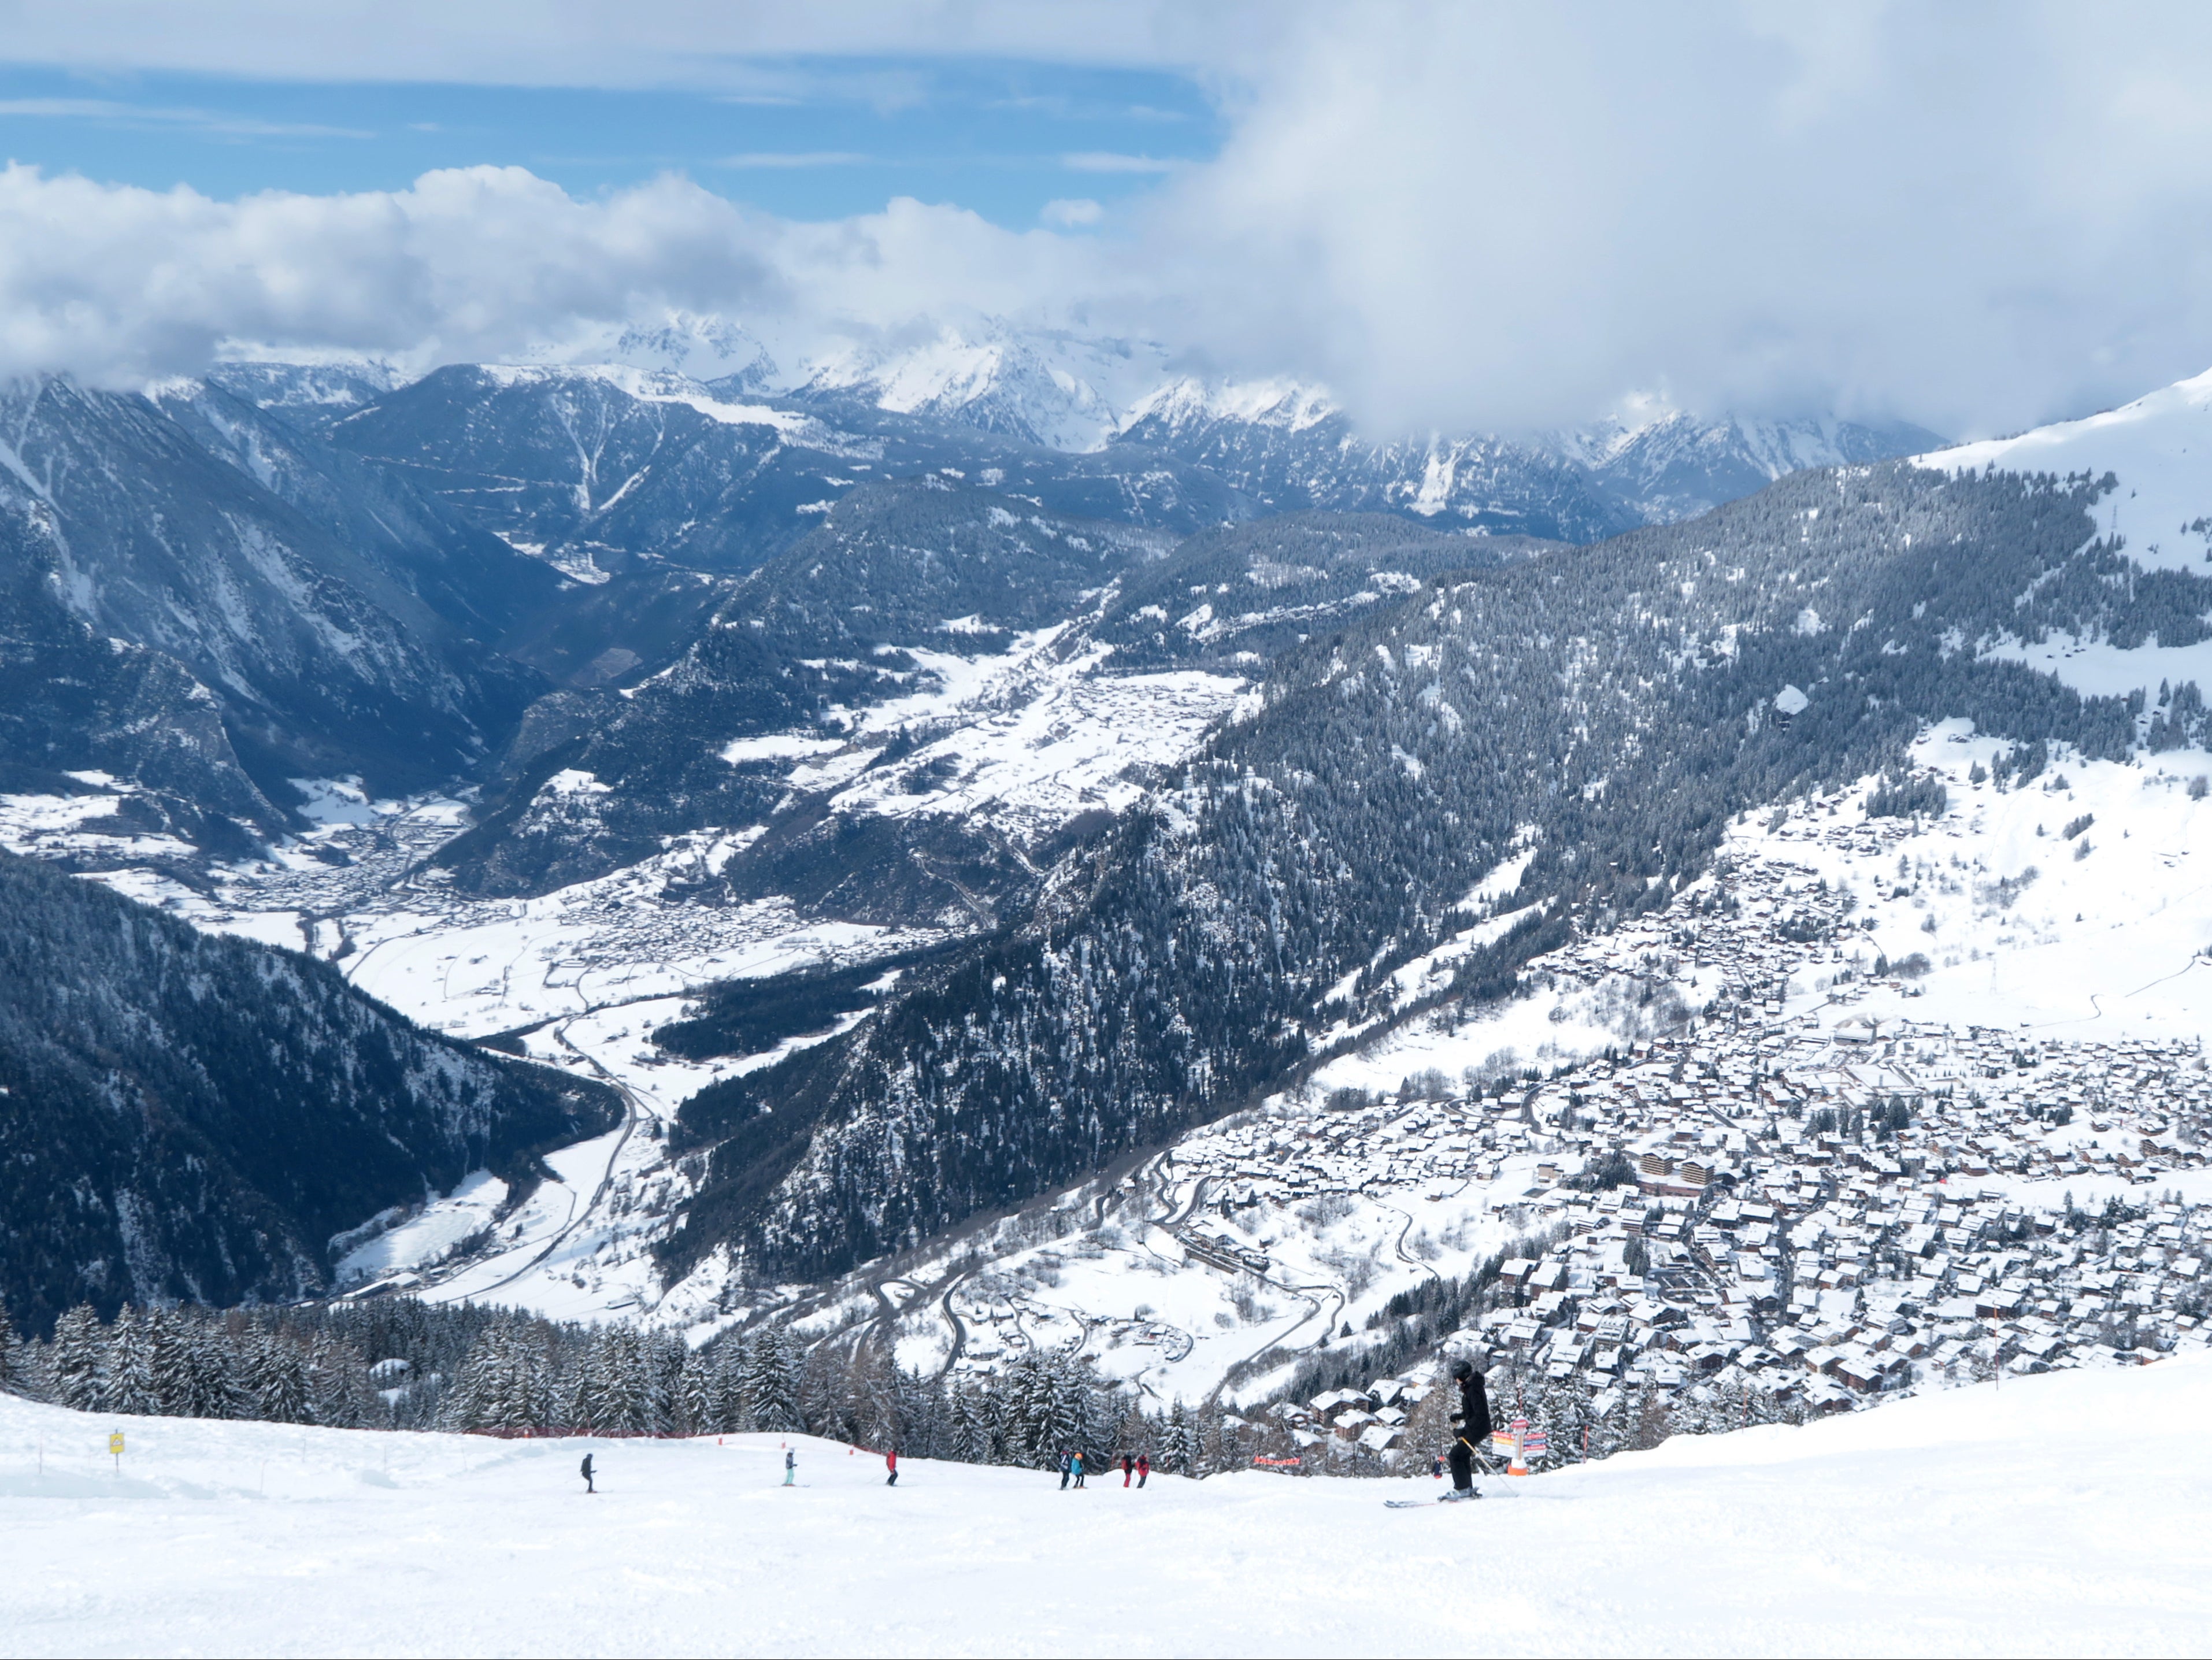 Holidays to Verbier, Switzerland, are off the table